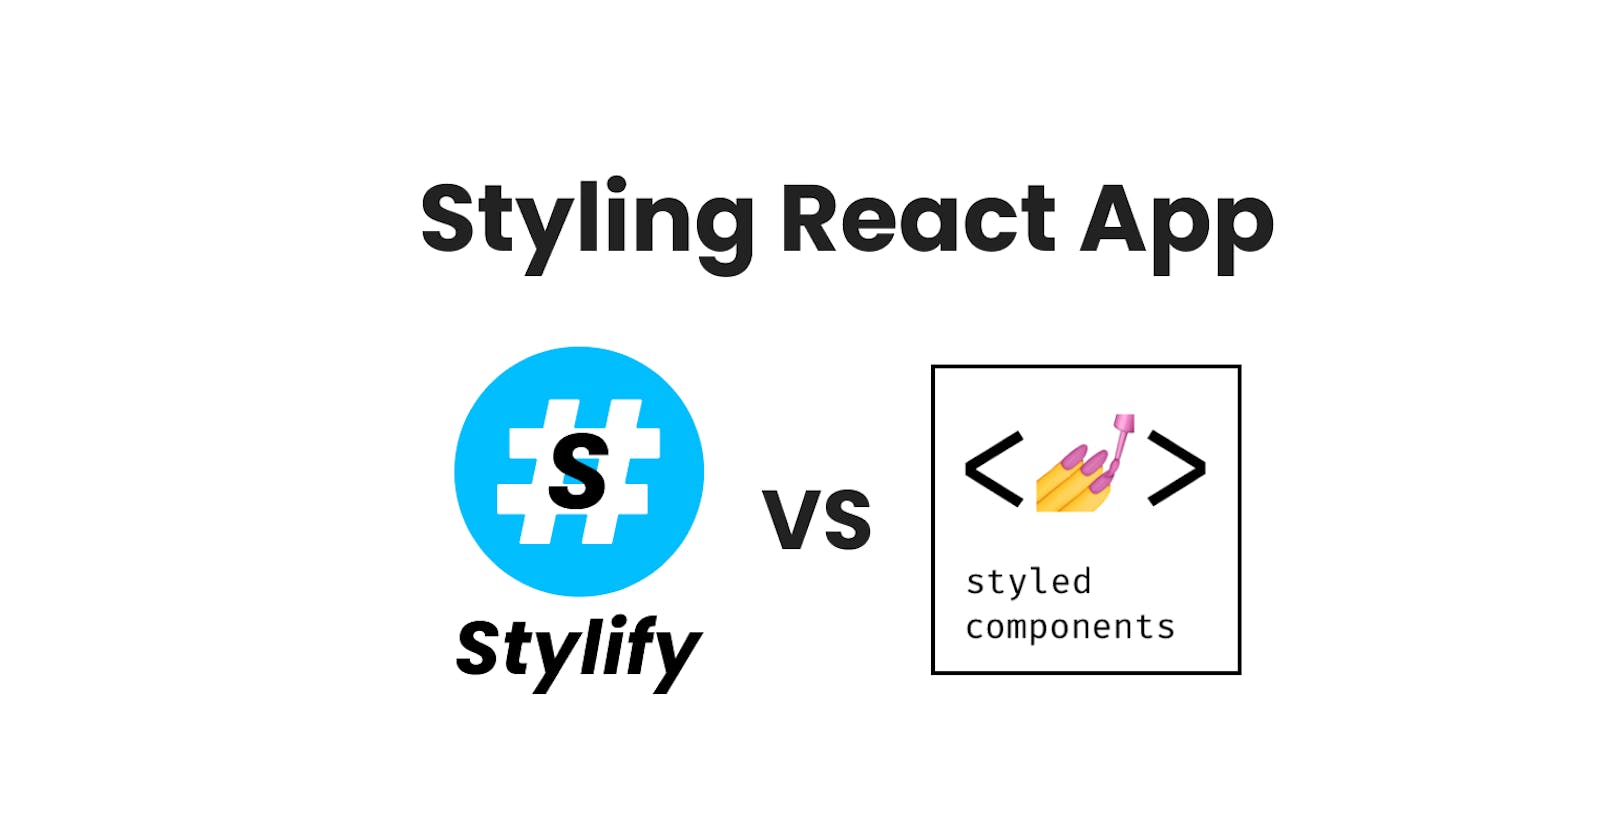 Styling React App: Stylify vs Styled Components